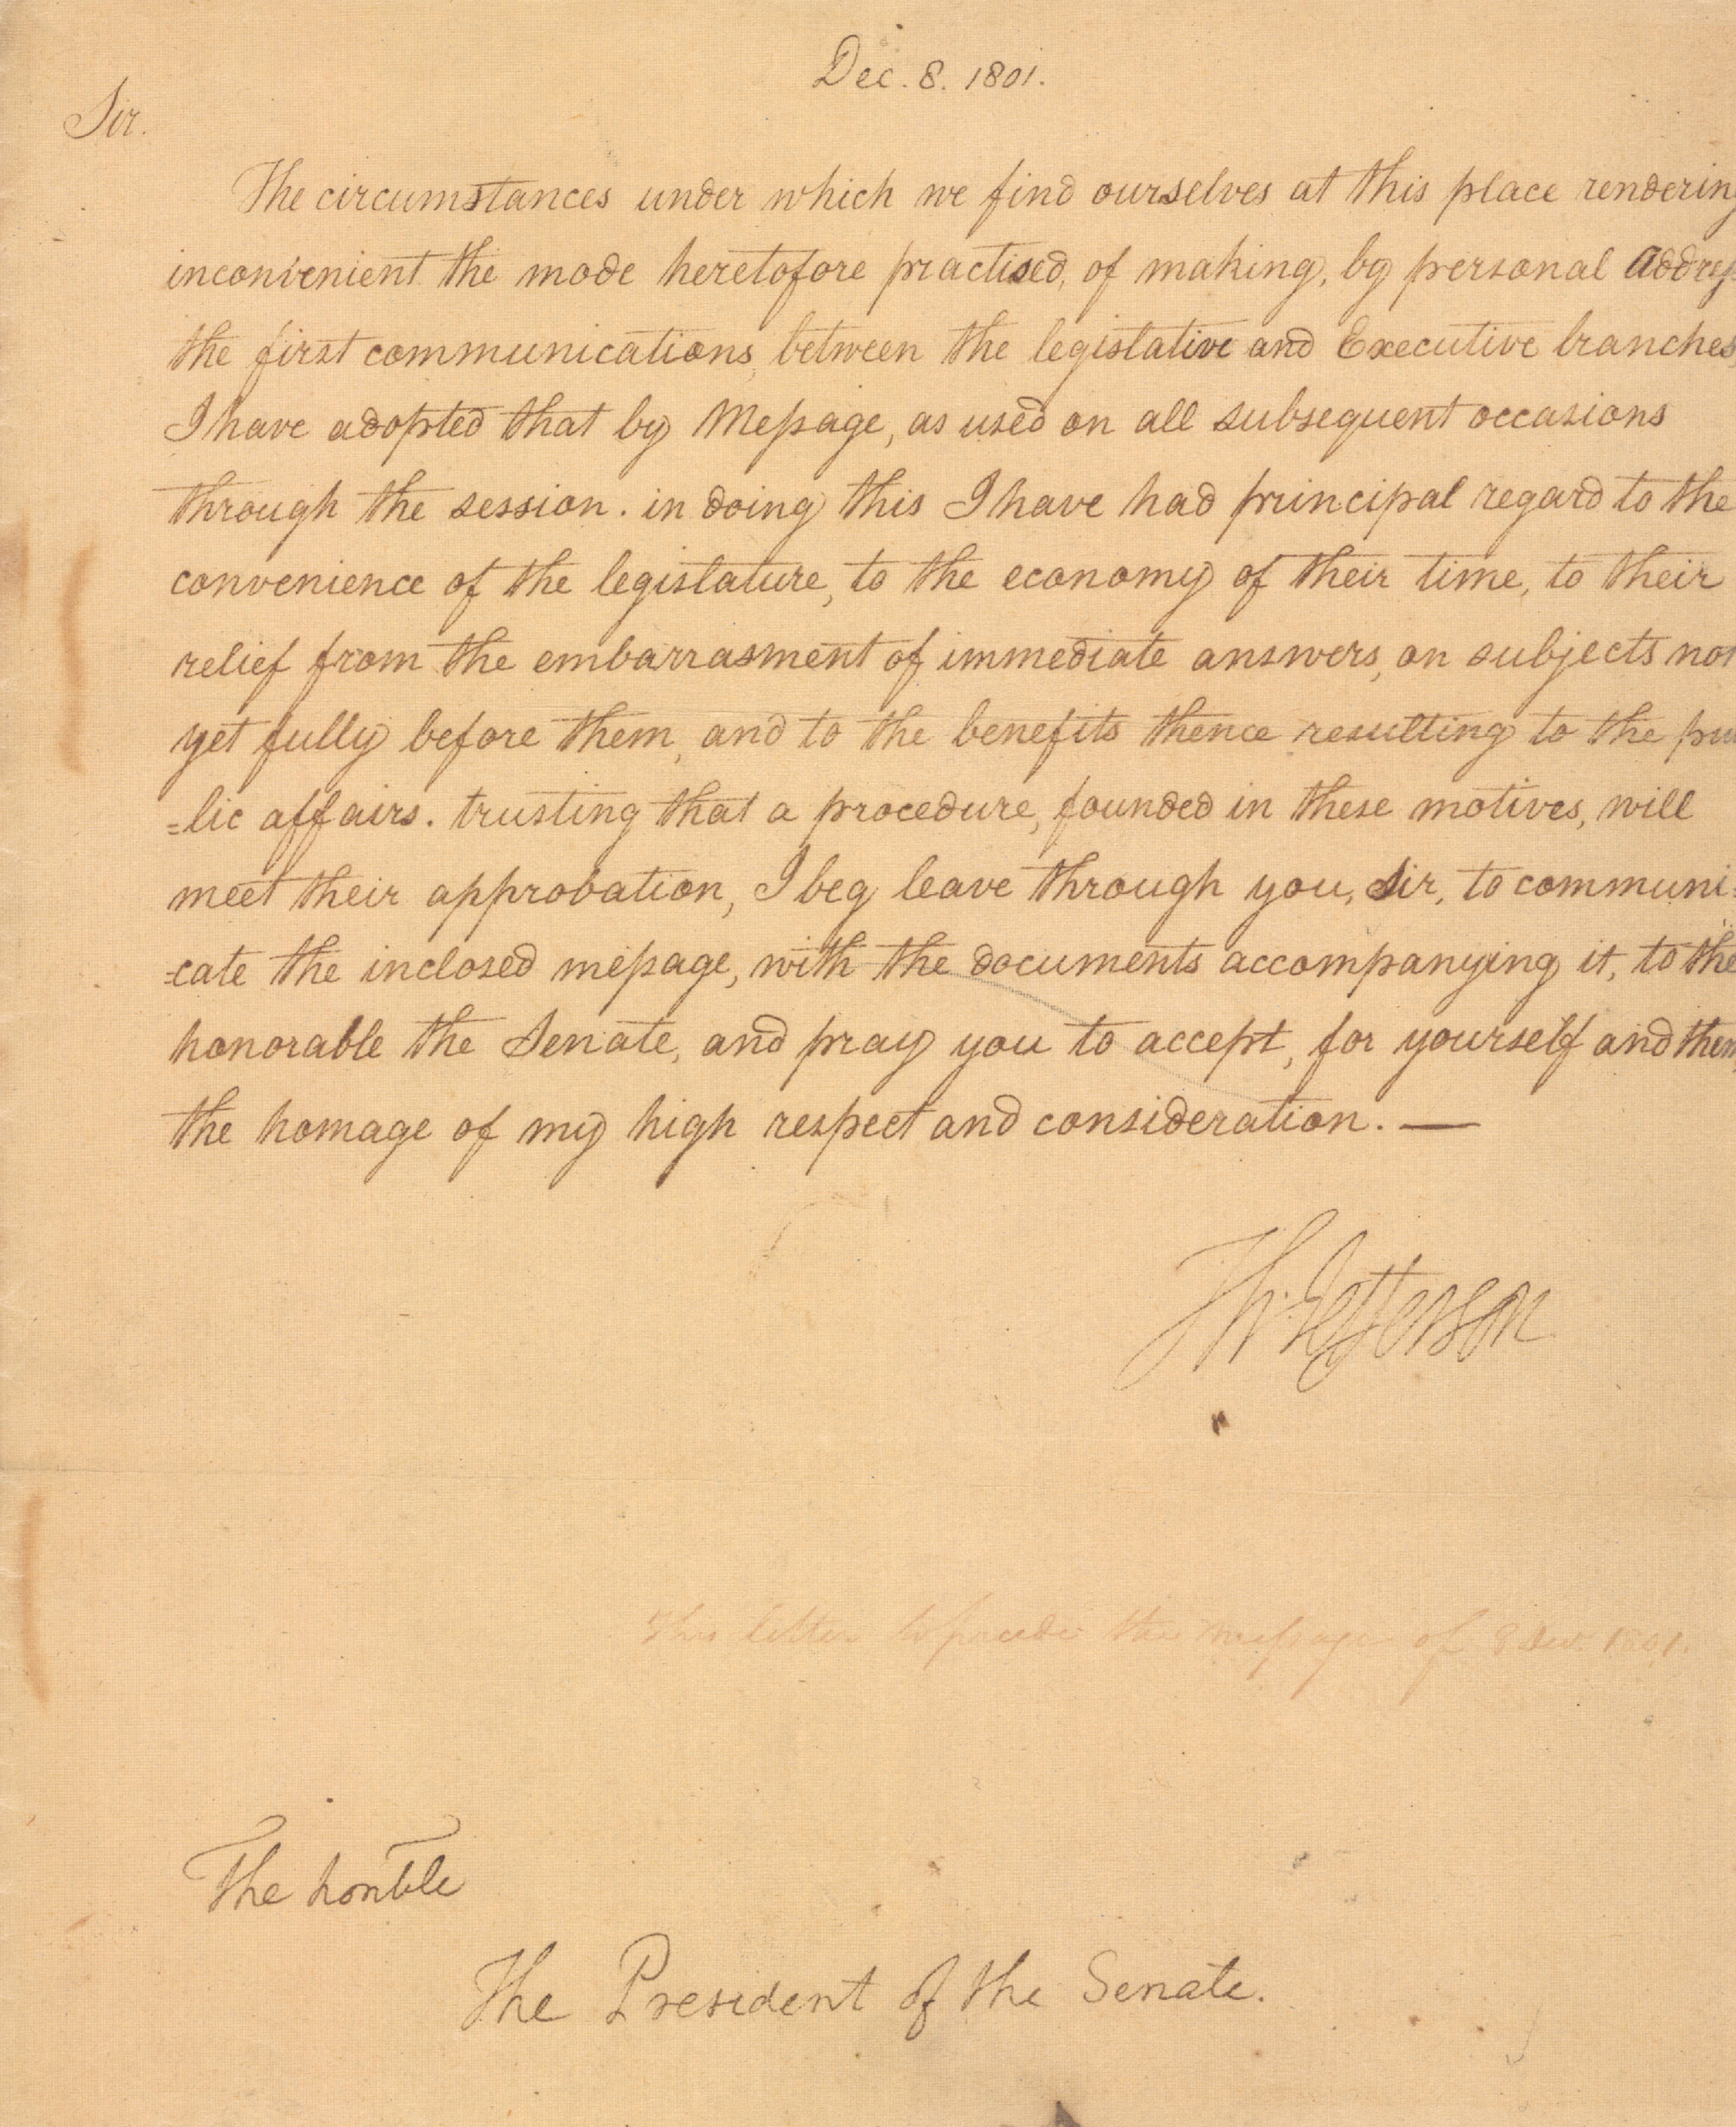 President Thomas Jefferson's letter to the President of the Senate regarding the Annual message, December 8, 1801 (National Archives)